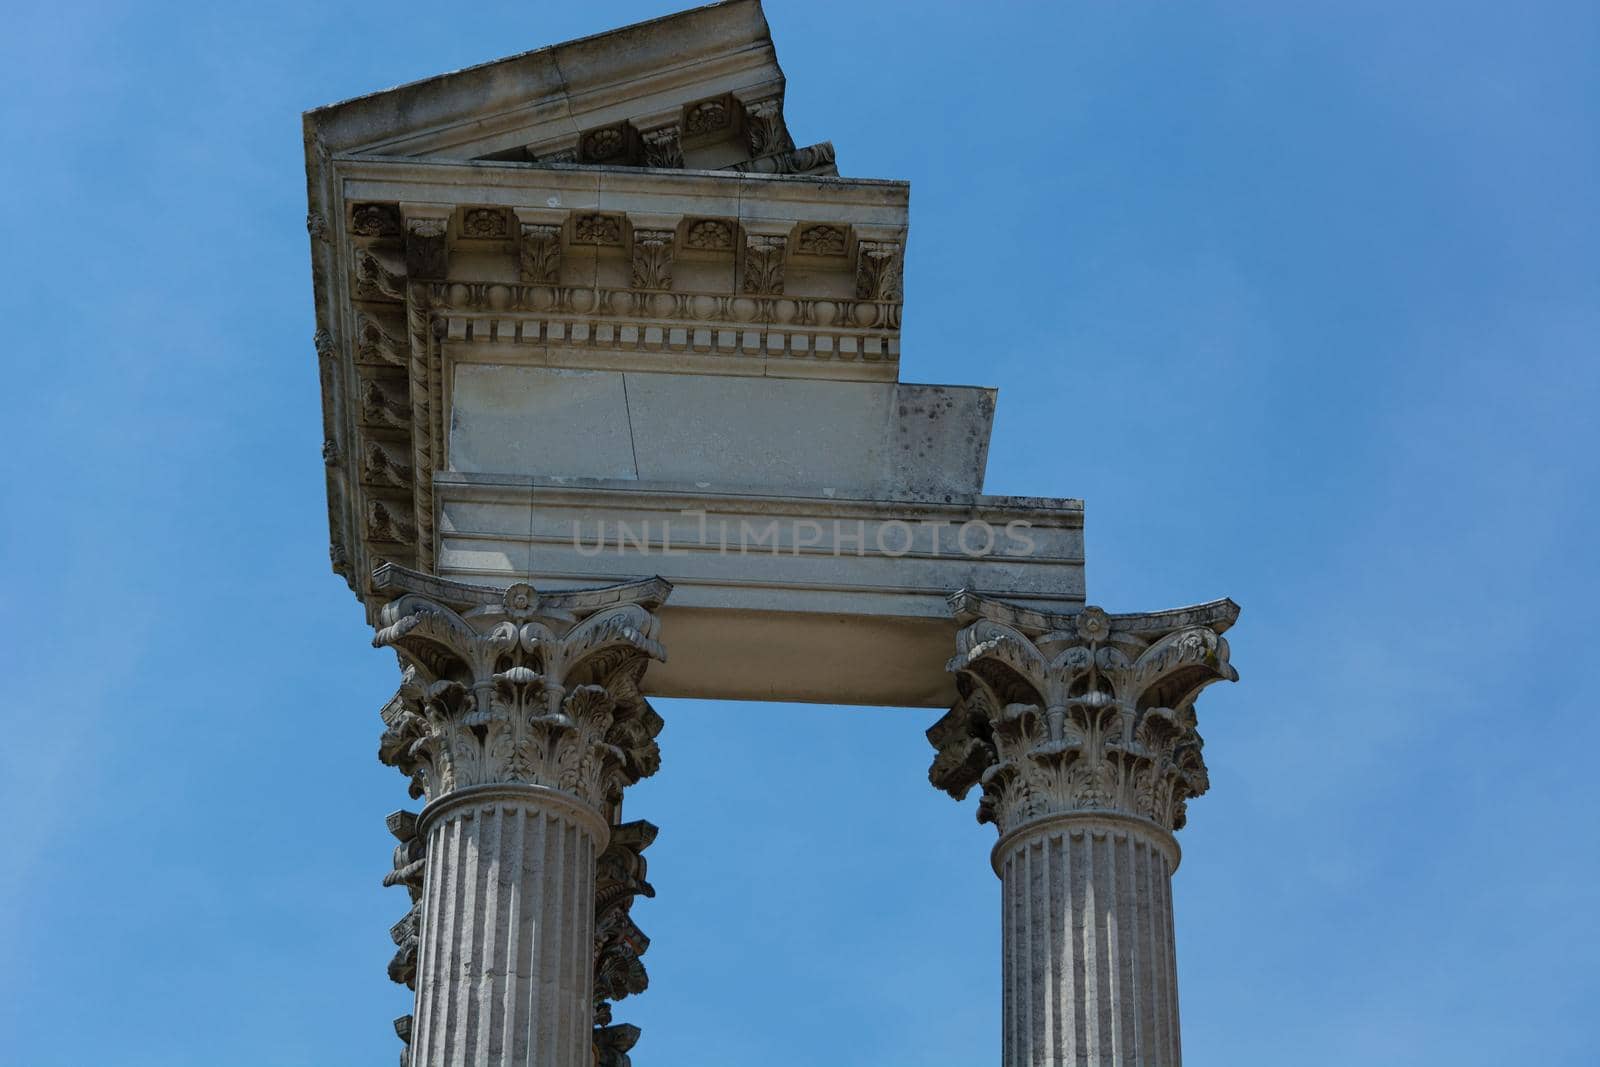 Greek columns of a temple in Greece, seen from below. Architecture, history, travel, landscapes